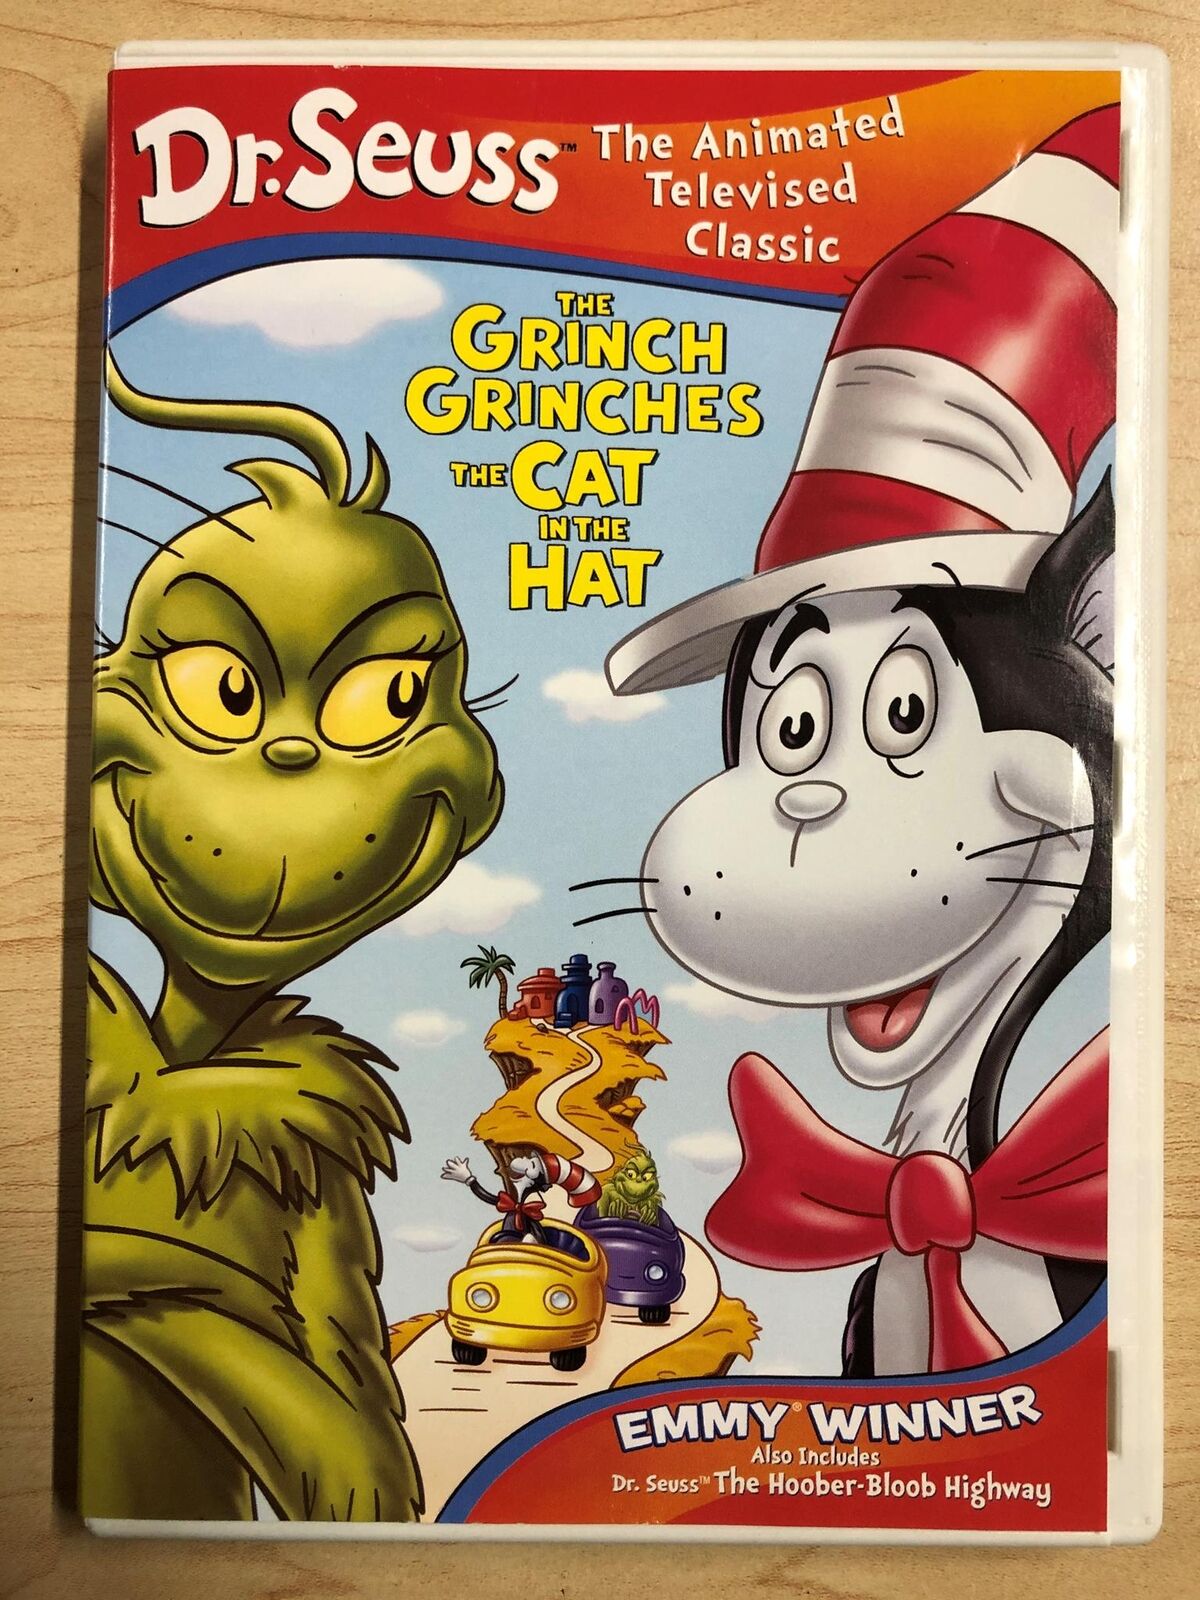 Dr. Seuss - The Grinch Grinches the Cat in the Hat (DVD, 2003) - J0205 ...